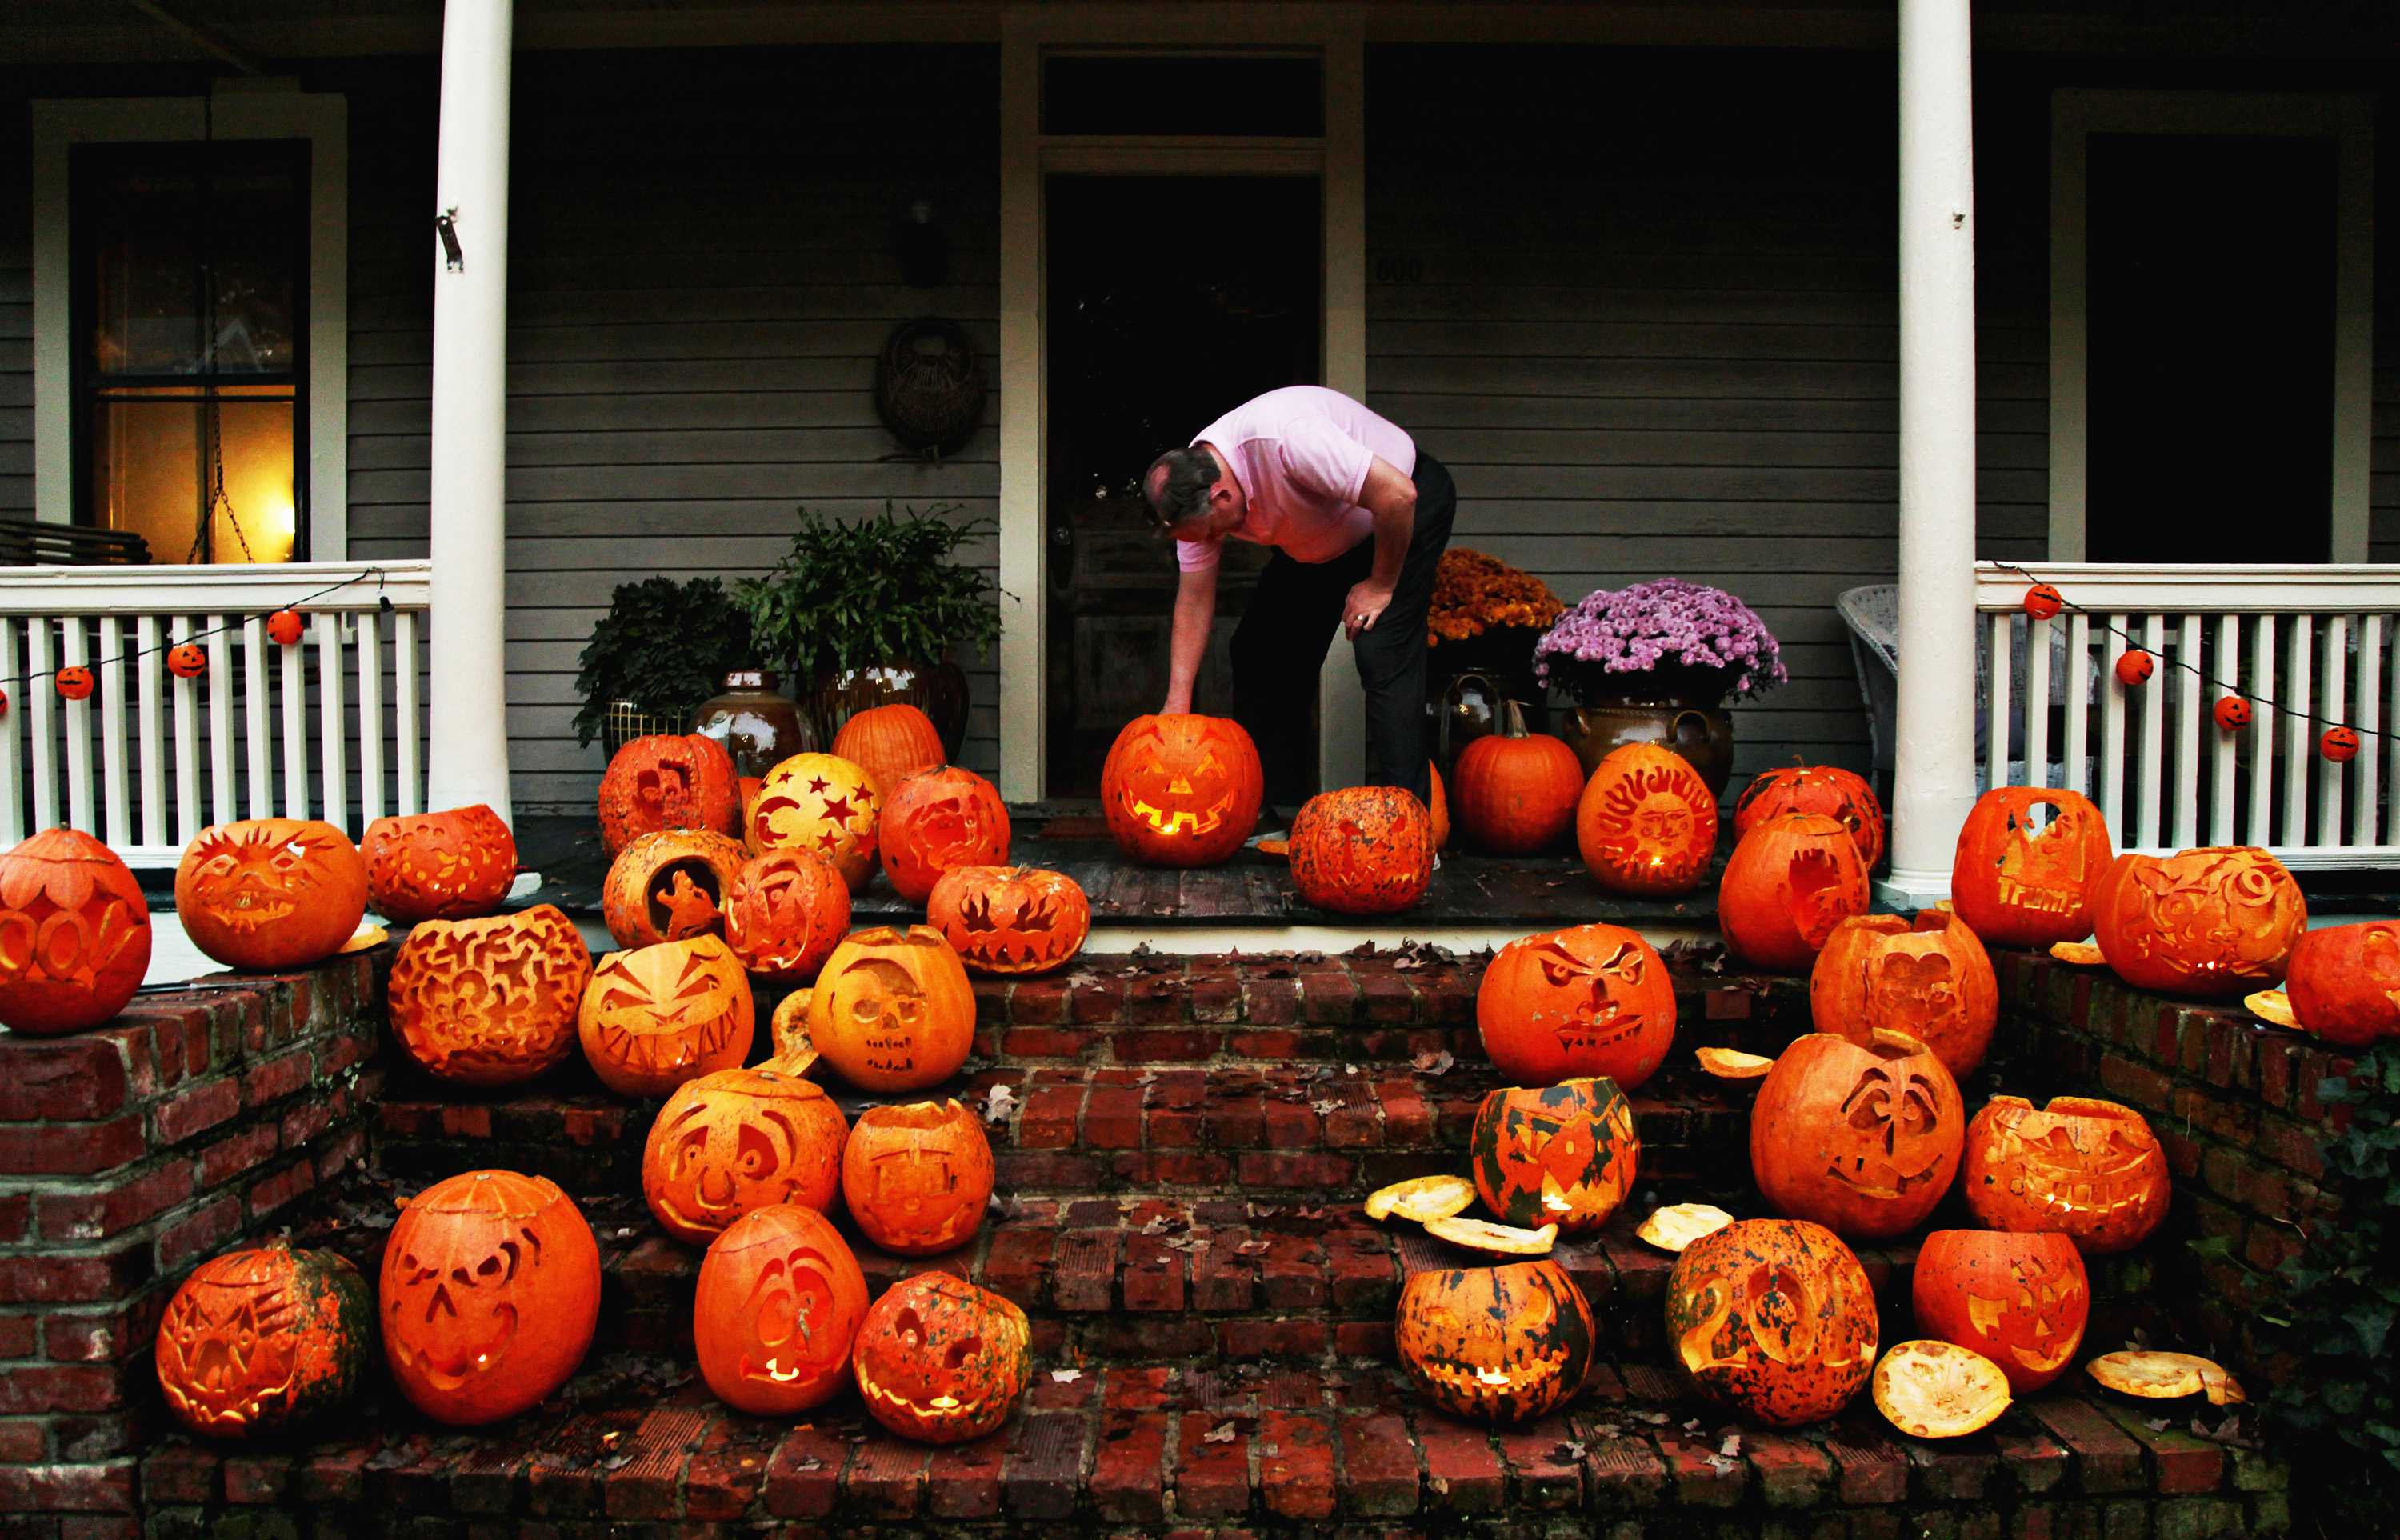 Man+shown+in+front+of+house+setting+up+approximately+20+different+jack-o-lanterns